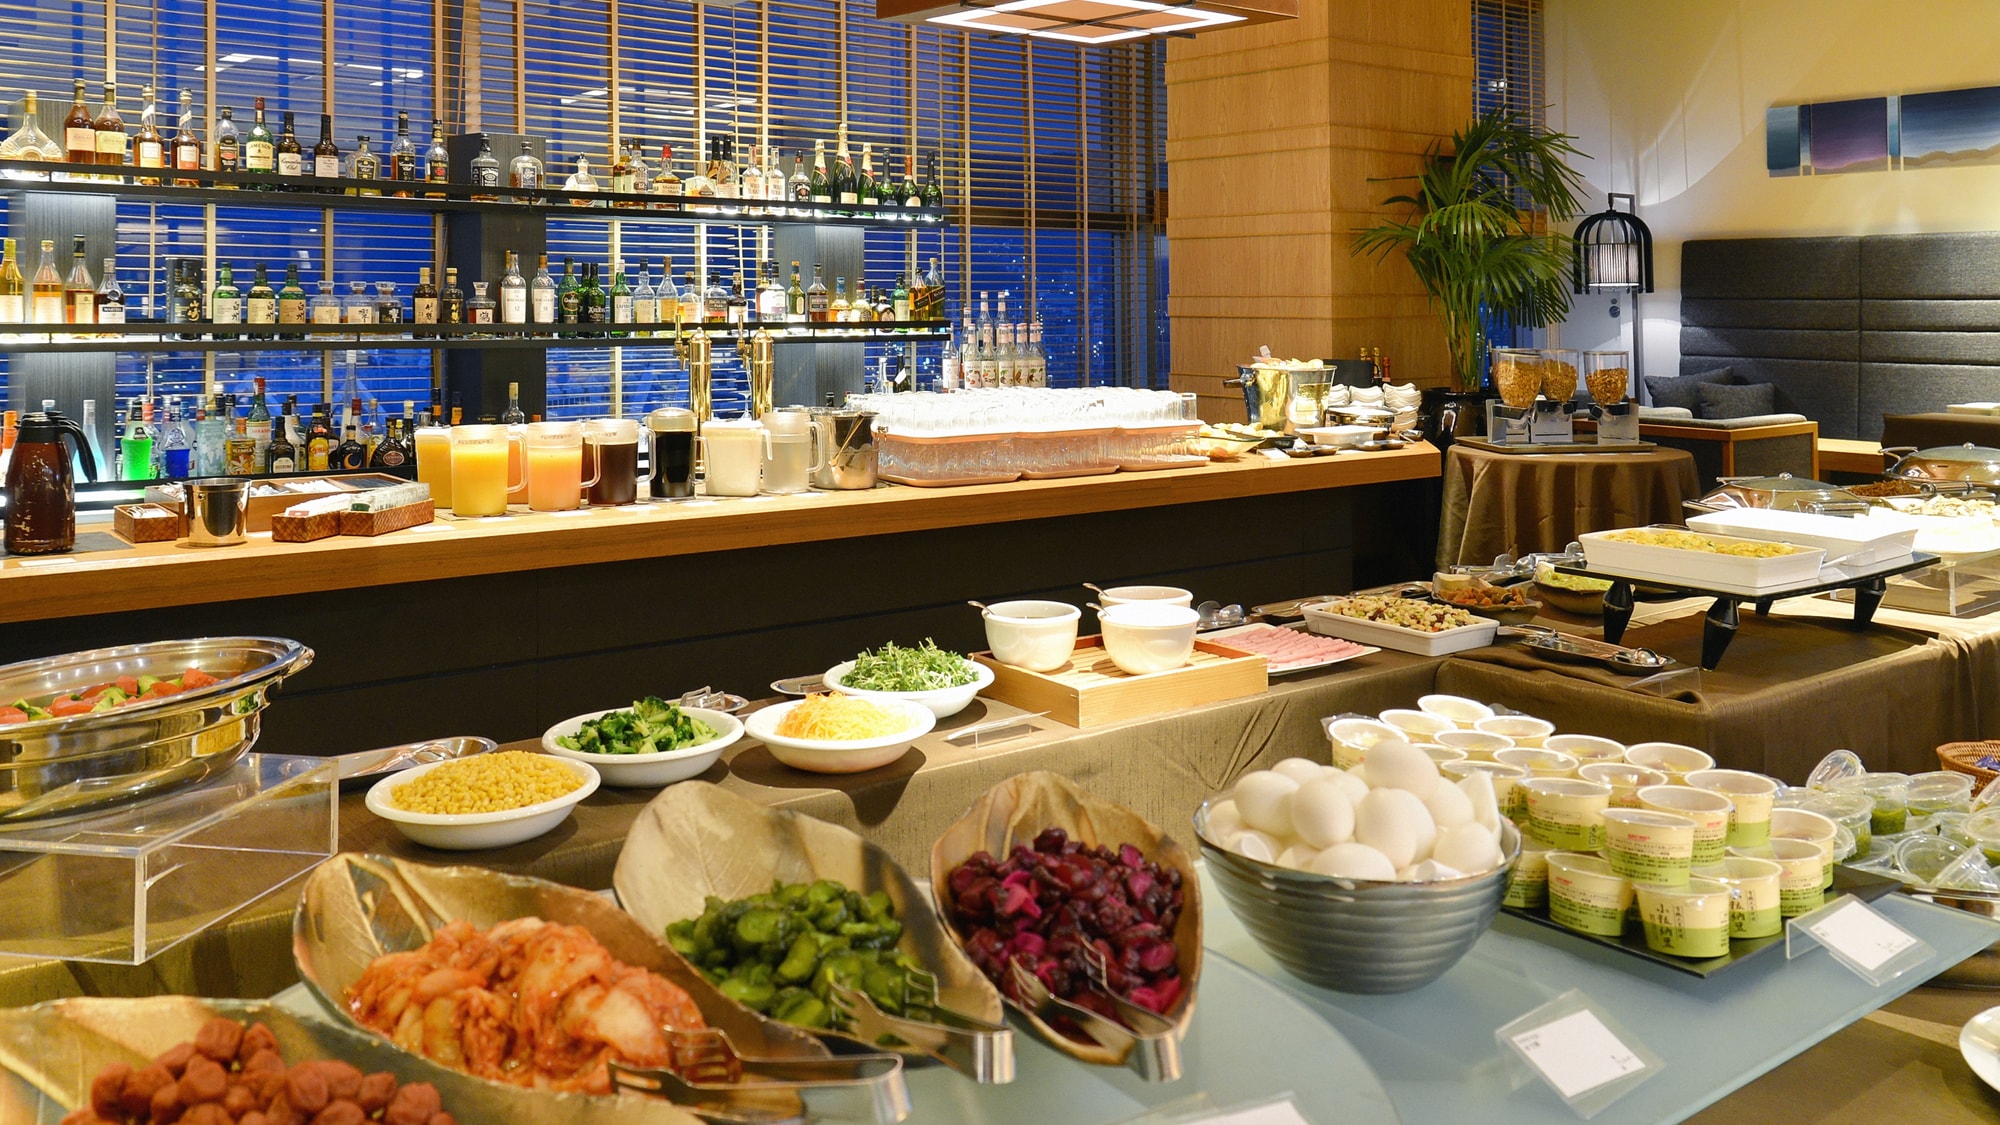 ◆ Approximately 40 breakfast buffets * Breakfast contents and business hours are subject to change.